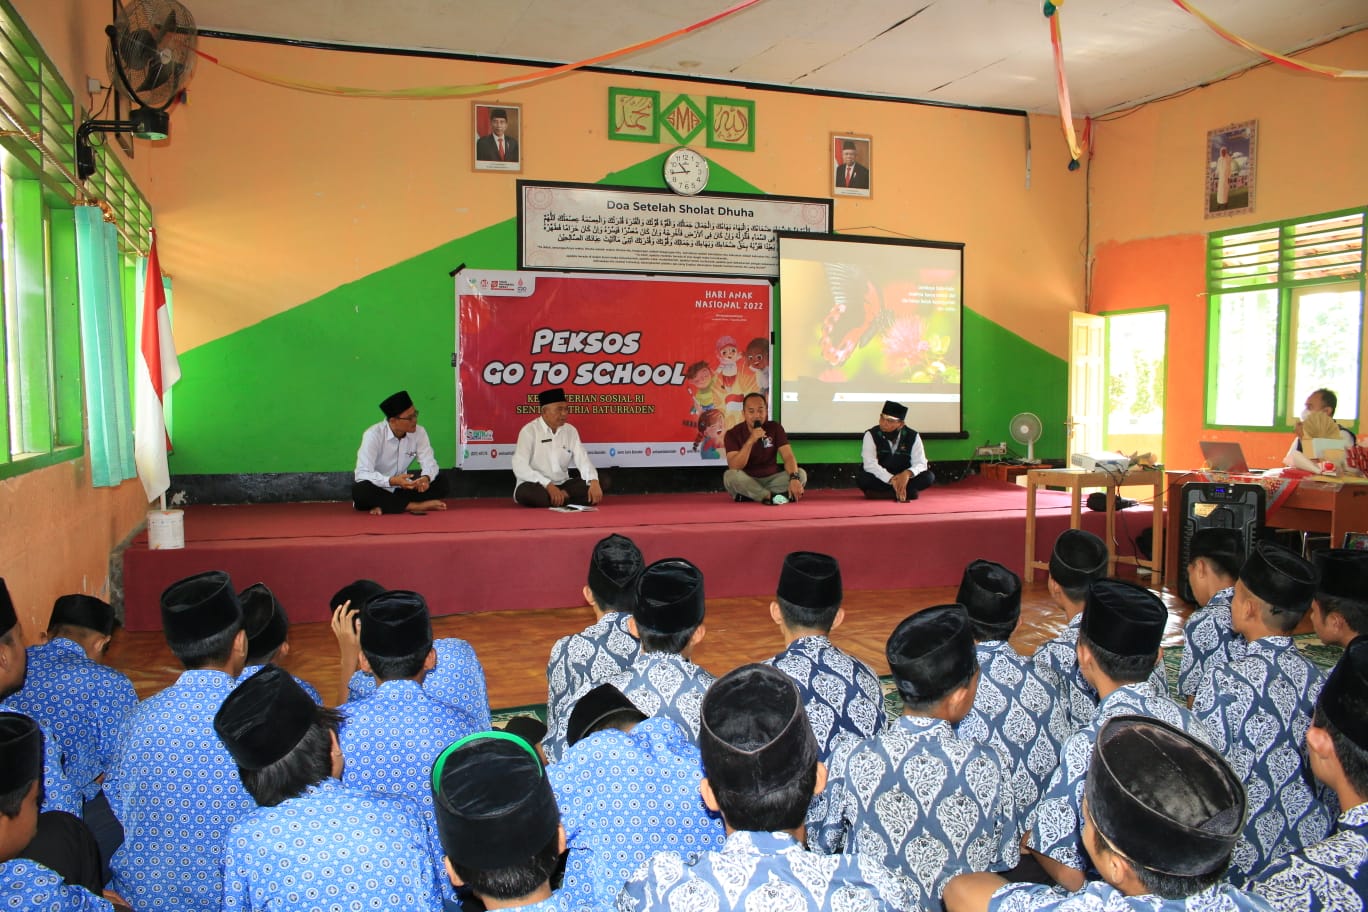 Goes to School, "Satria" Center Team Calls for the Danger of Drugs